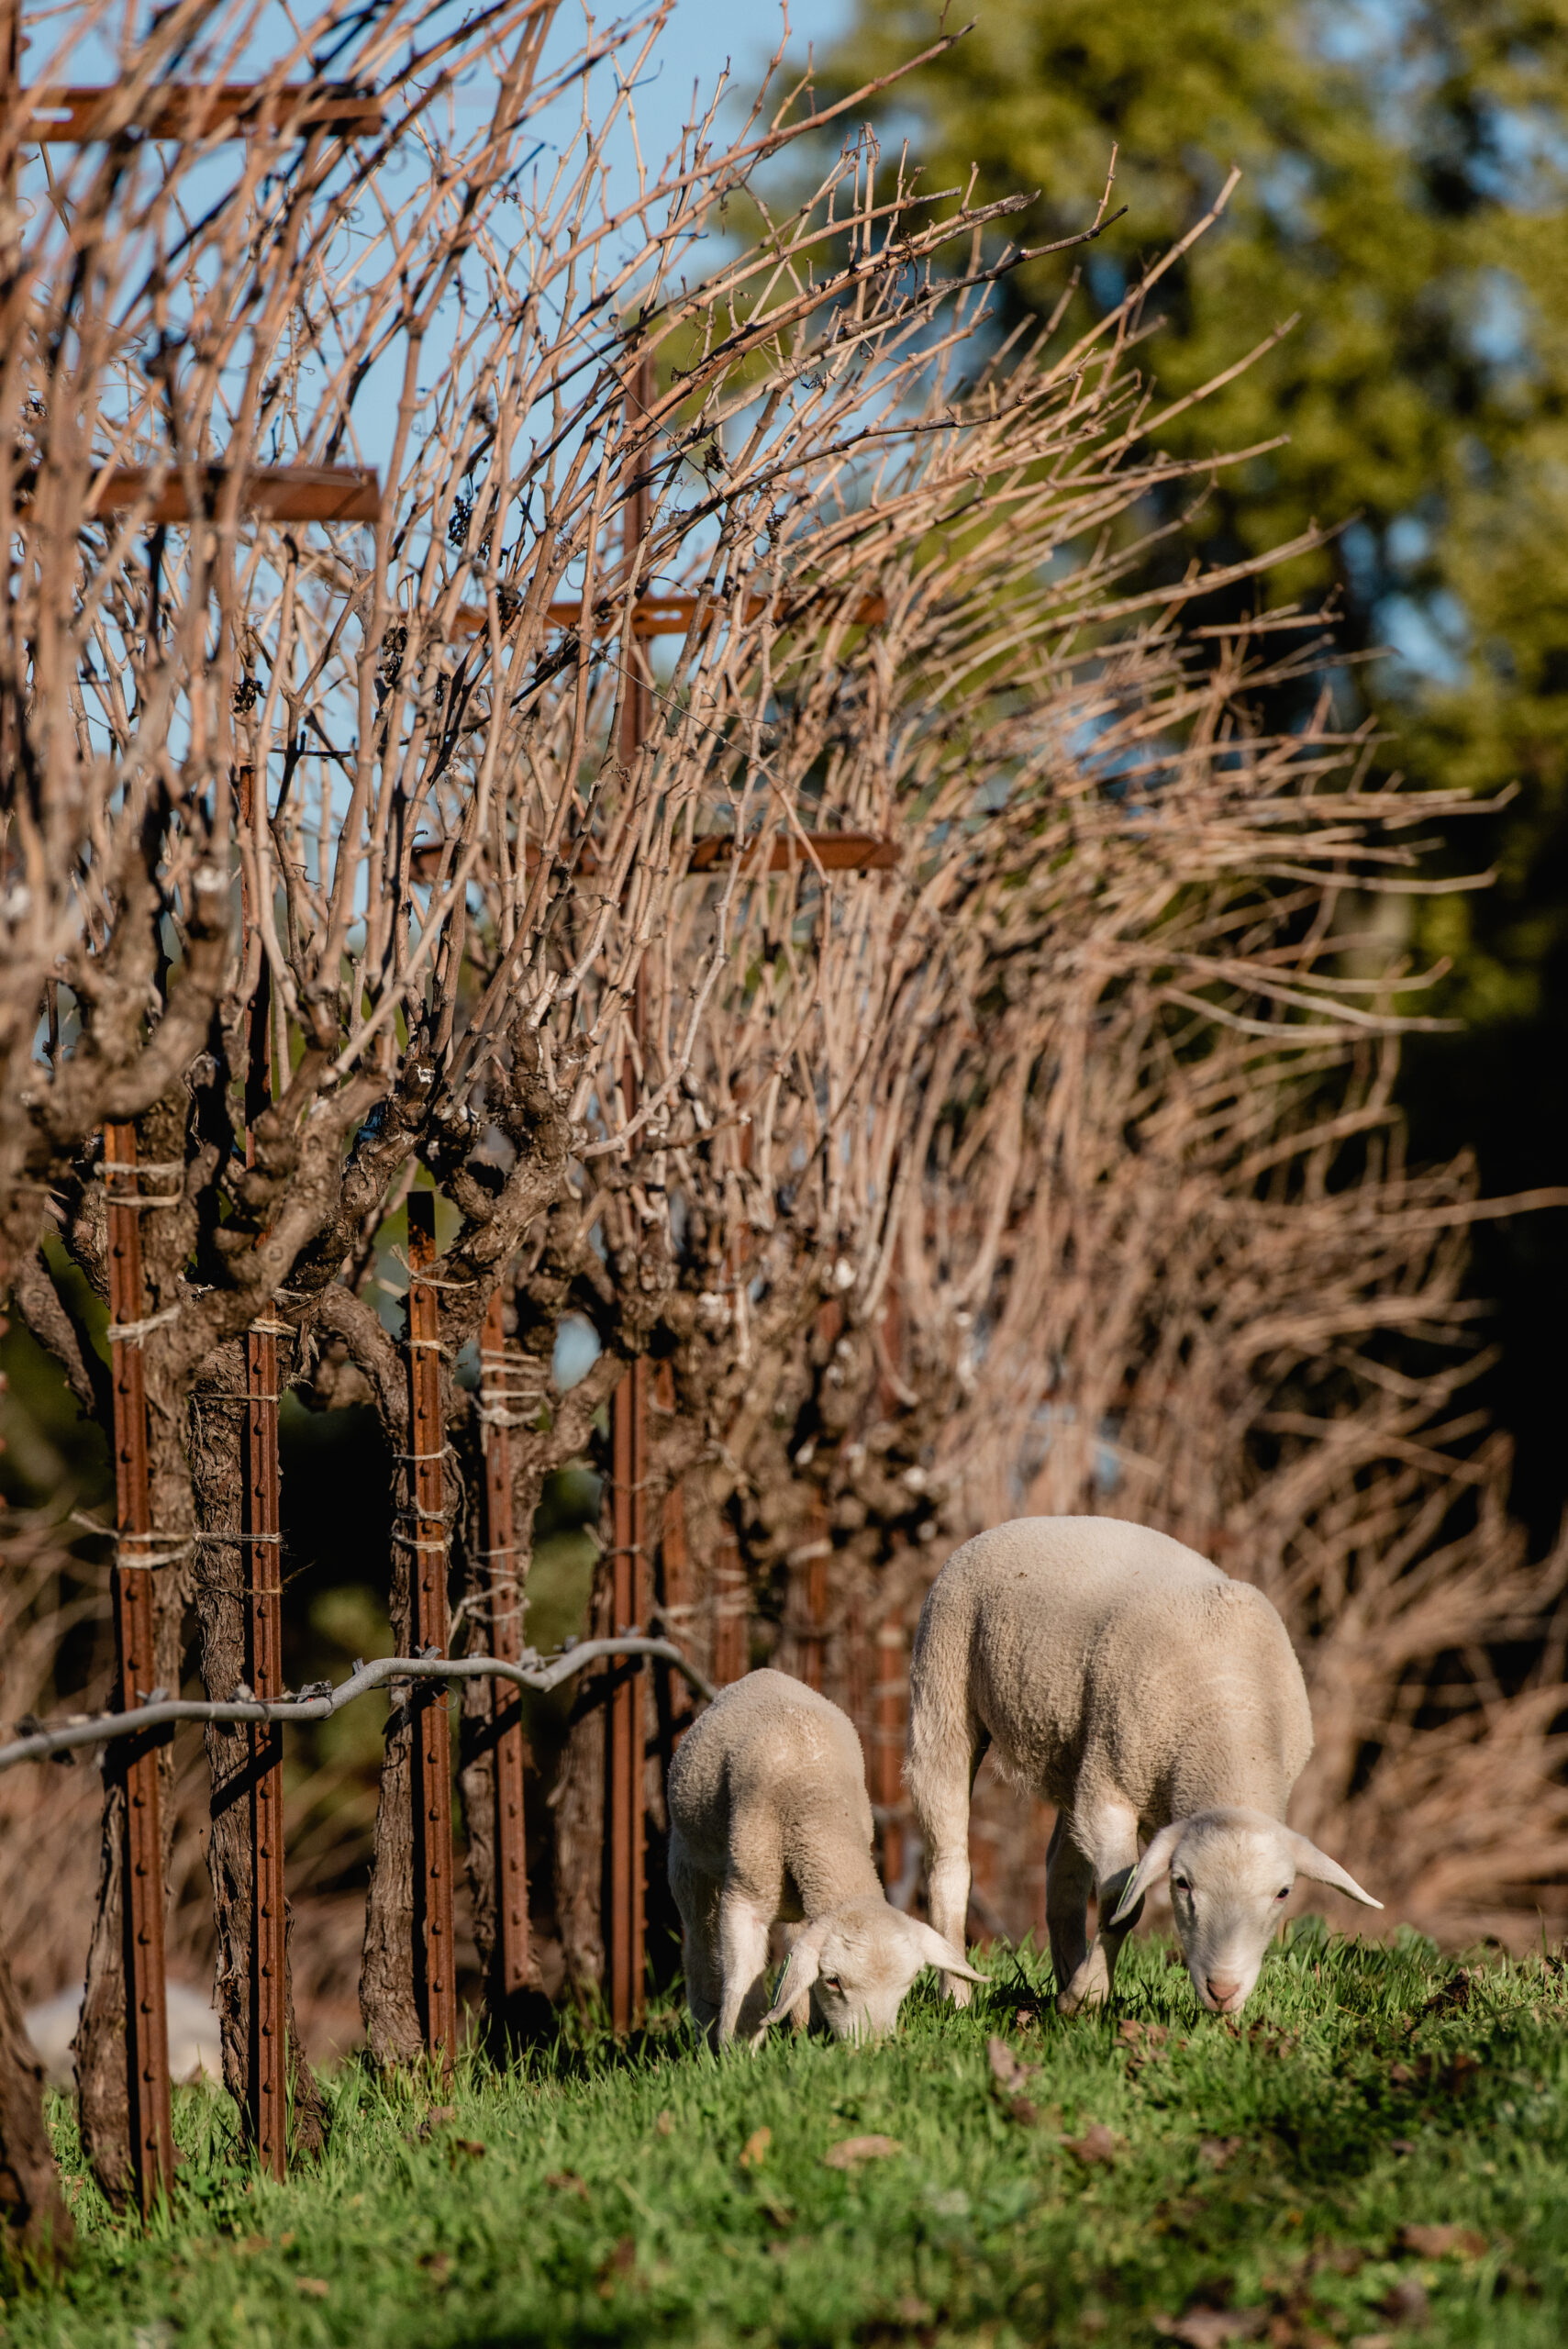 The sheep are raised and live at Benziger Winery (as opposed to being leased).